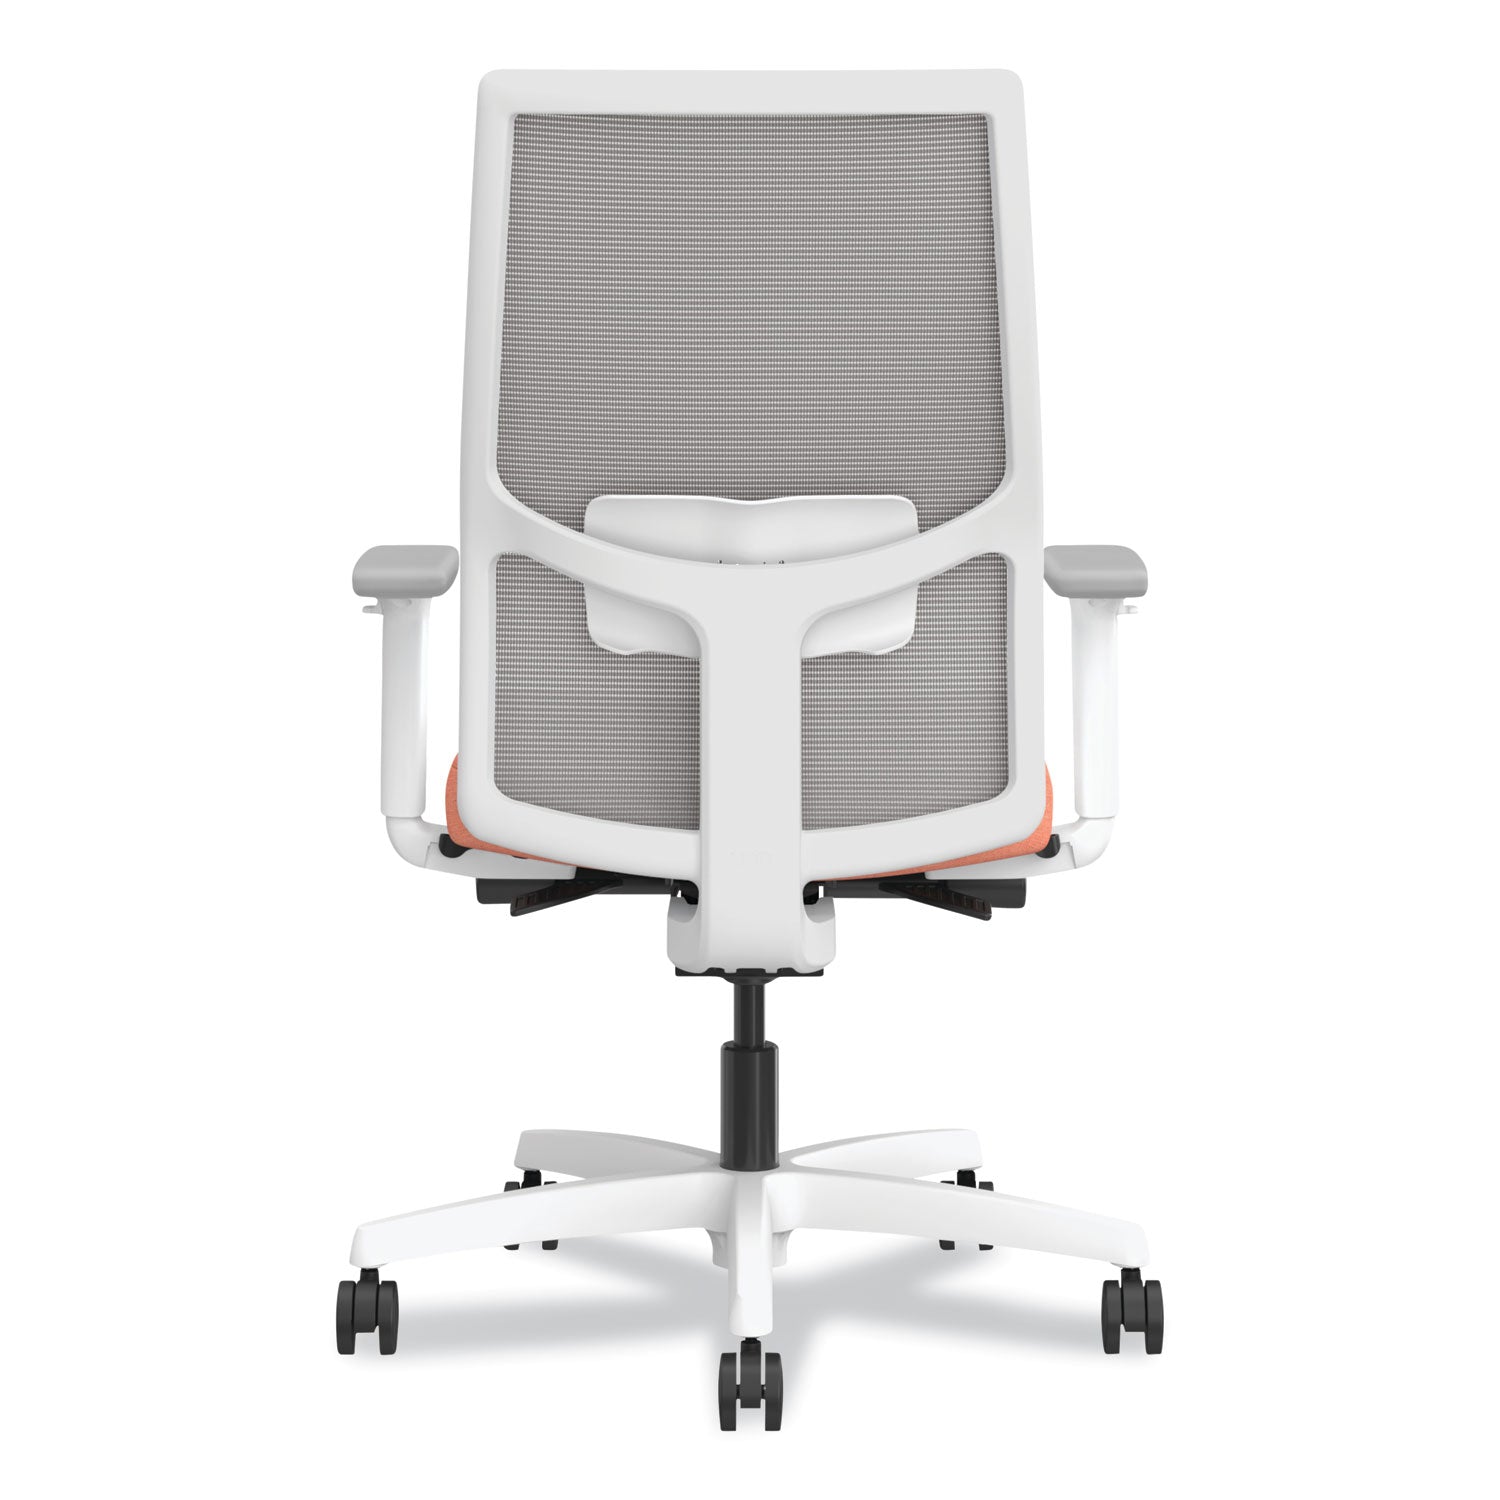 ignition-20-4-way-stretch-mid-back-mesh-task-chairwhite-lumbar-support-passion-fruit-fog-whiteships-in-7-10-business-days_honi2mm2afh02wx - 2